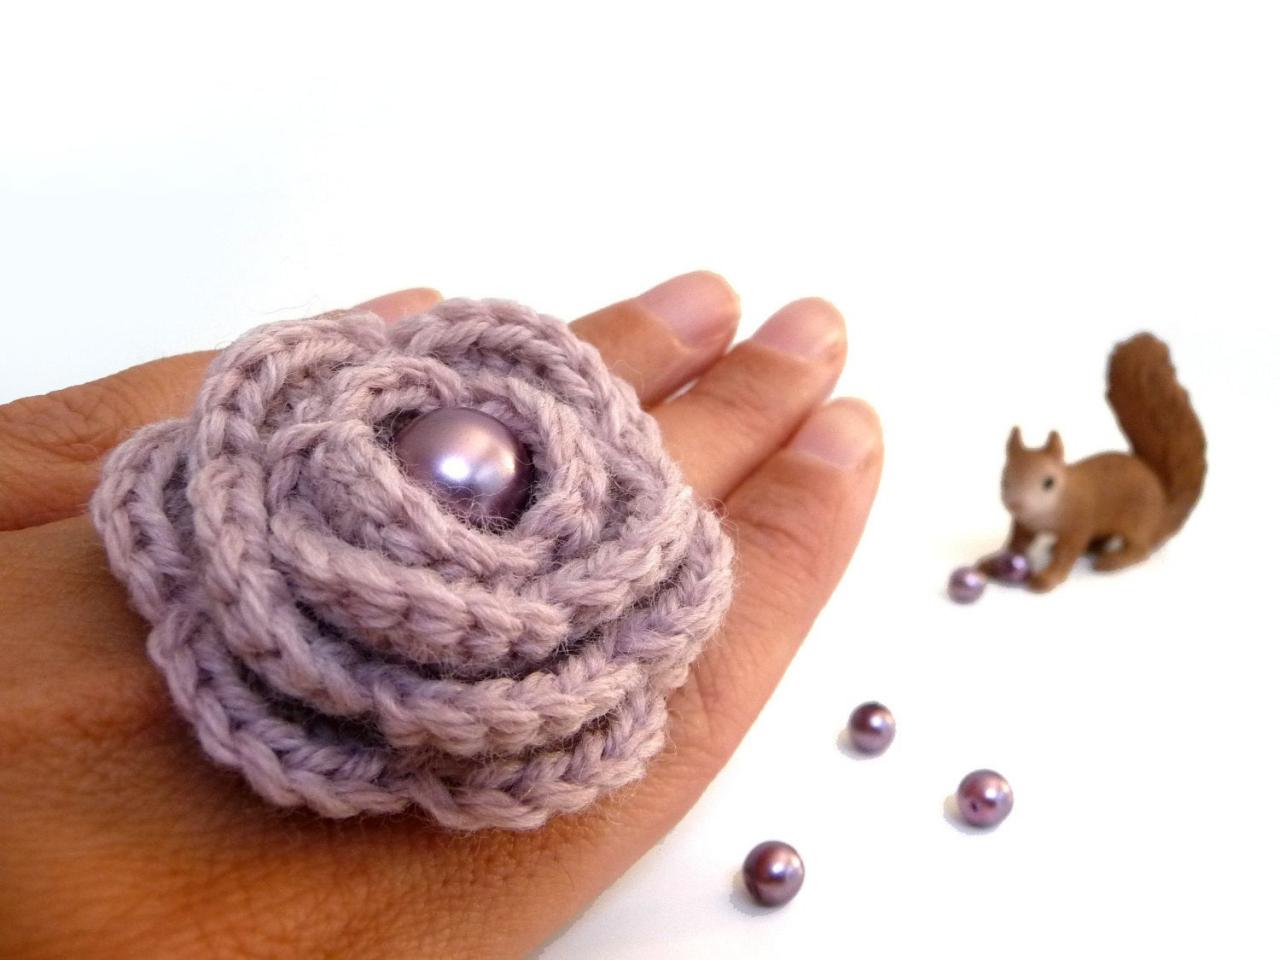 Dusty Pink Flower Ring, Crochet Wool Rose, Adjustable, Boho, Statement, Romantic Ring, Bridesmaid, Mothers Day, Anniversary, Valentines Gift